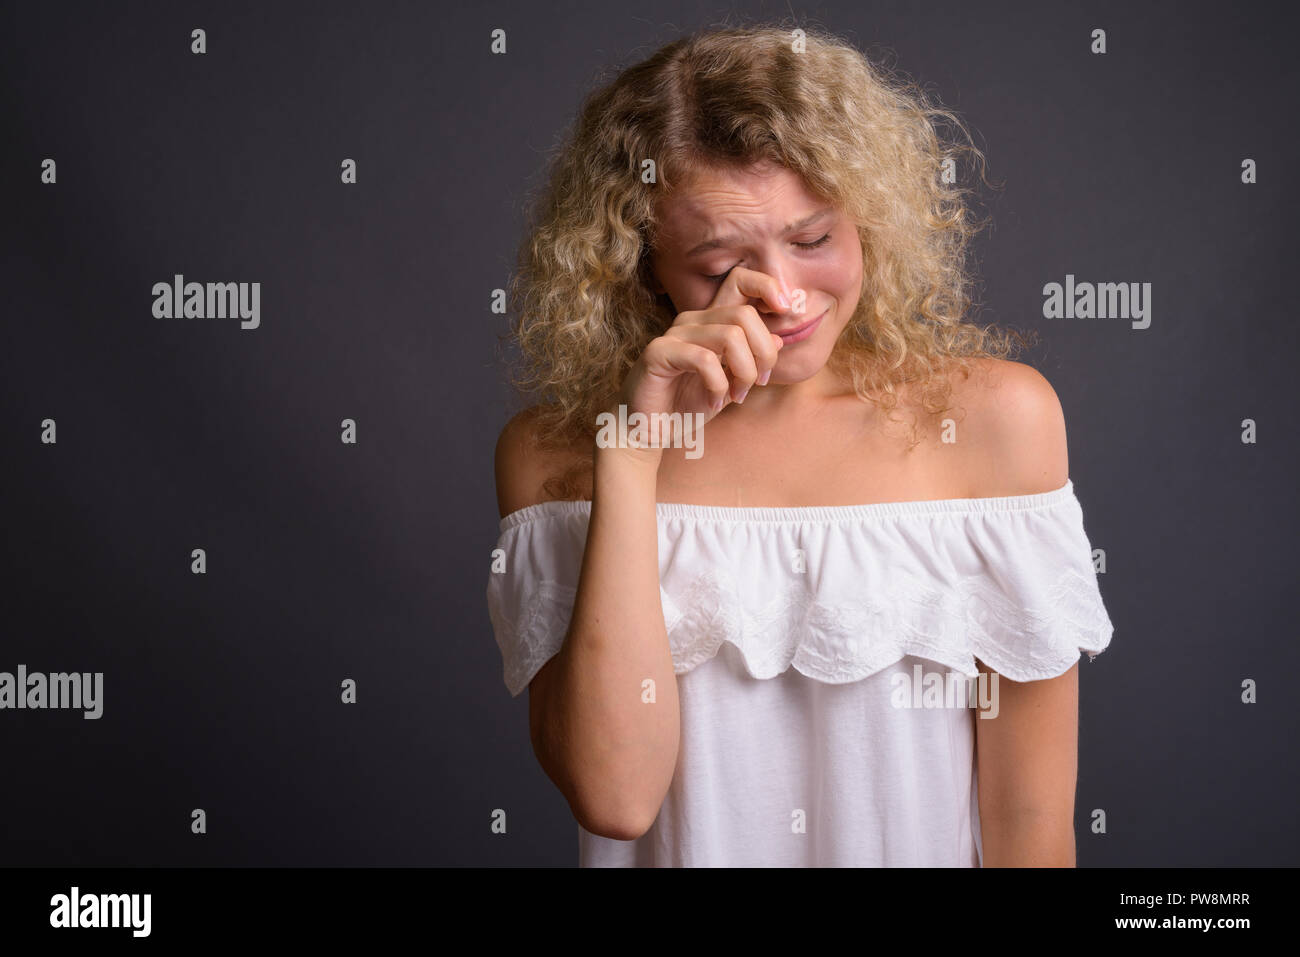 Studio shot of young beautiful woman with blond curly hair against gray background Stock Photo